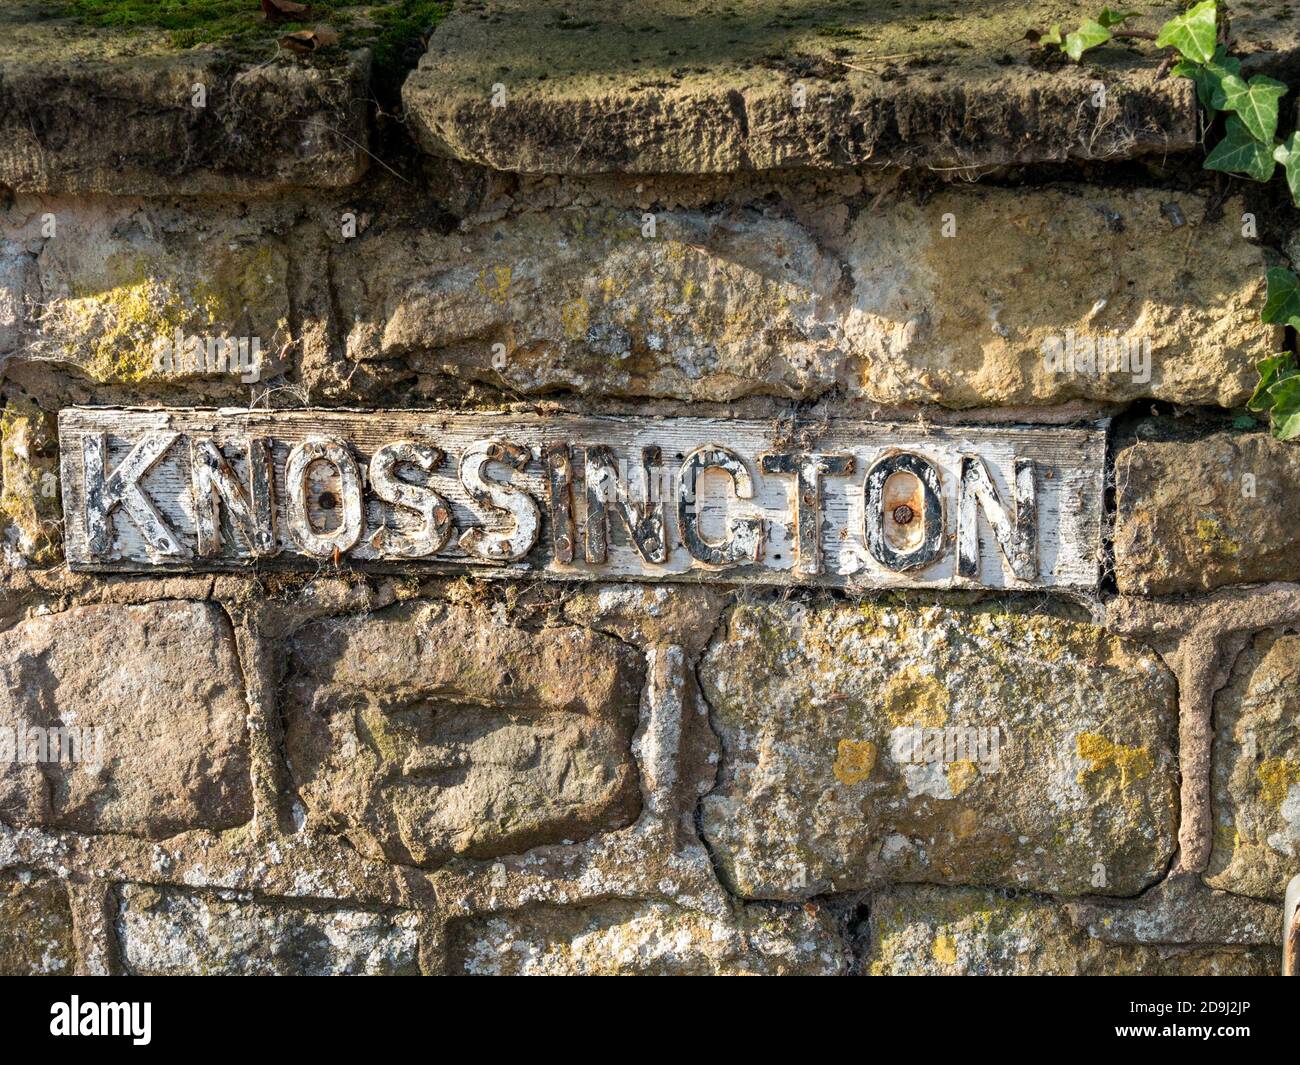 'Knossington' pretty, old cast iron sign with raised embossed lettering set into old stone wall, Knossington, Leicestershire. Stock Photo